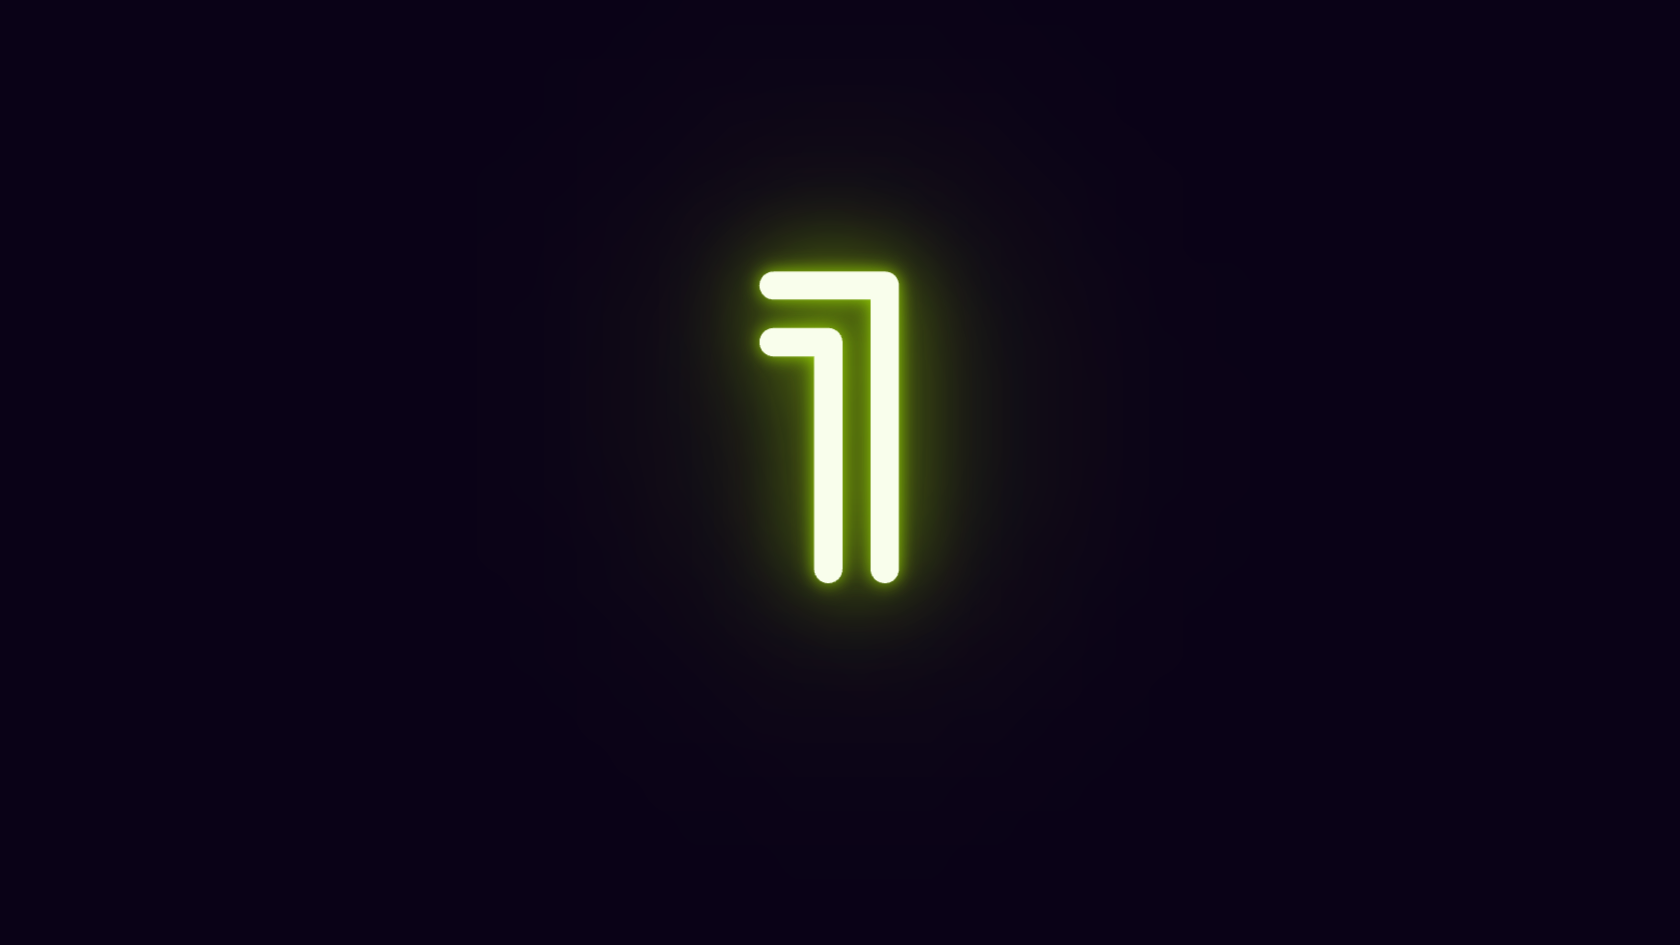 The number 1 in a neon green font on a black background. Minimalist presentation.